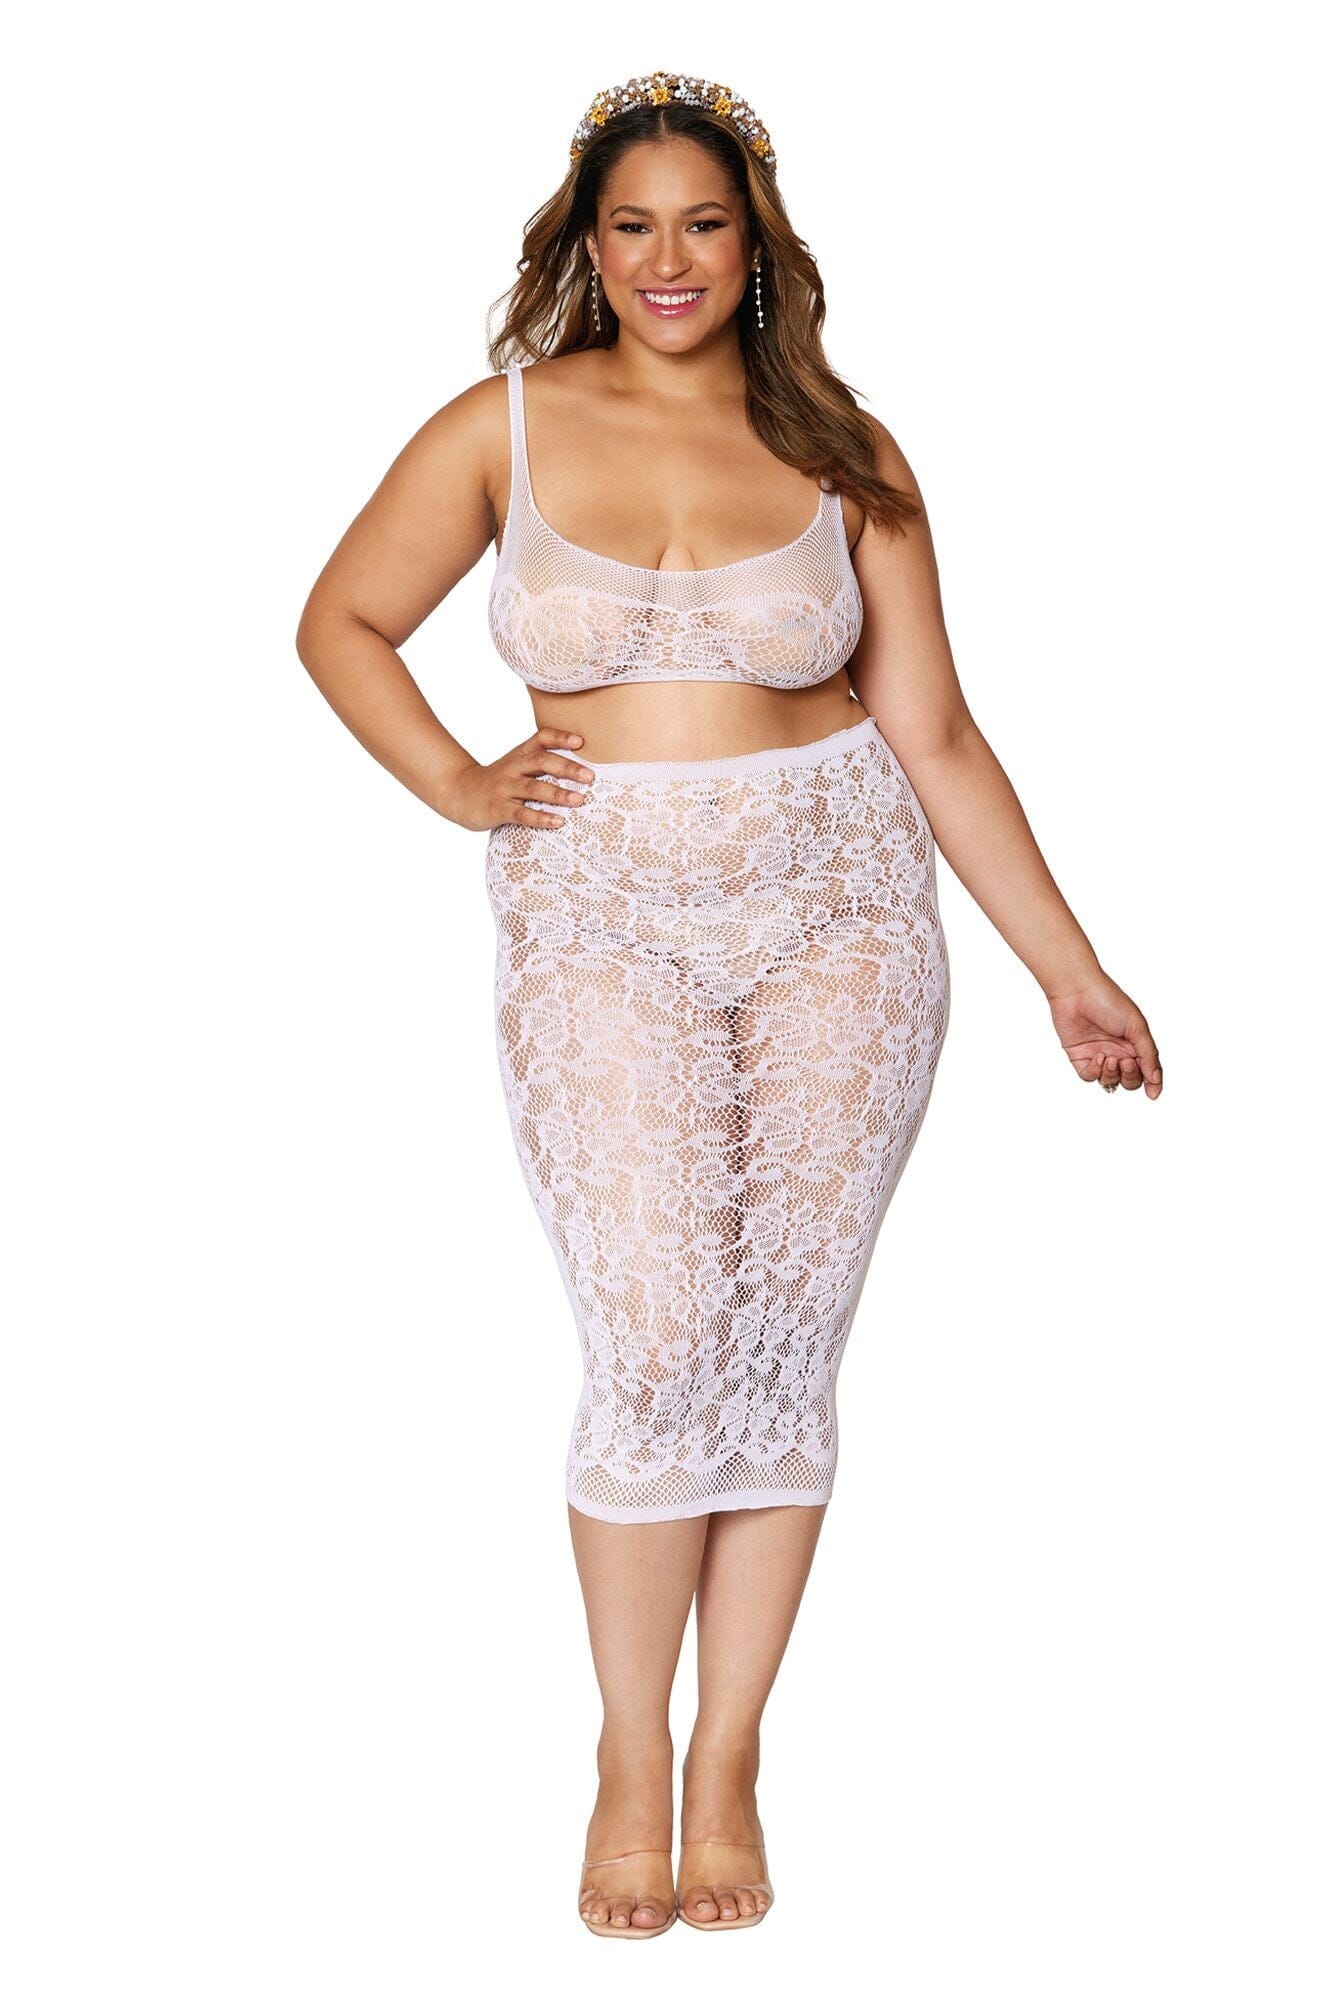 Dreamgirl Seamless lace bralette and slip skirt